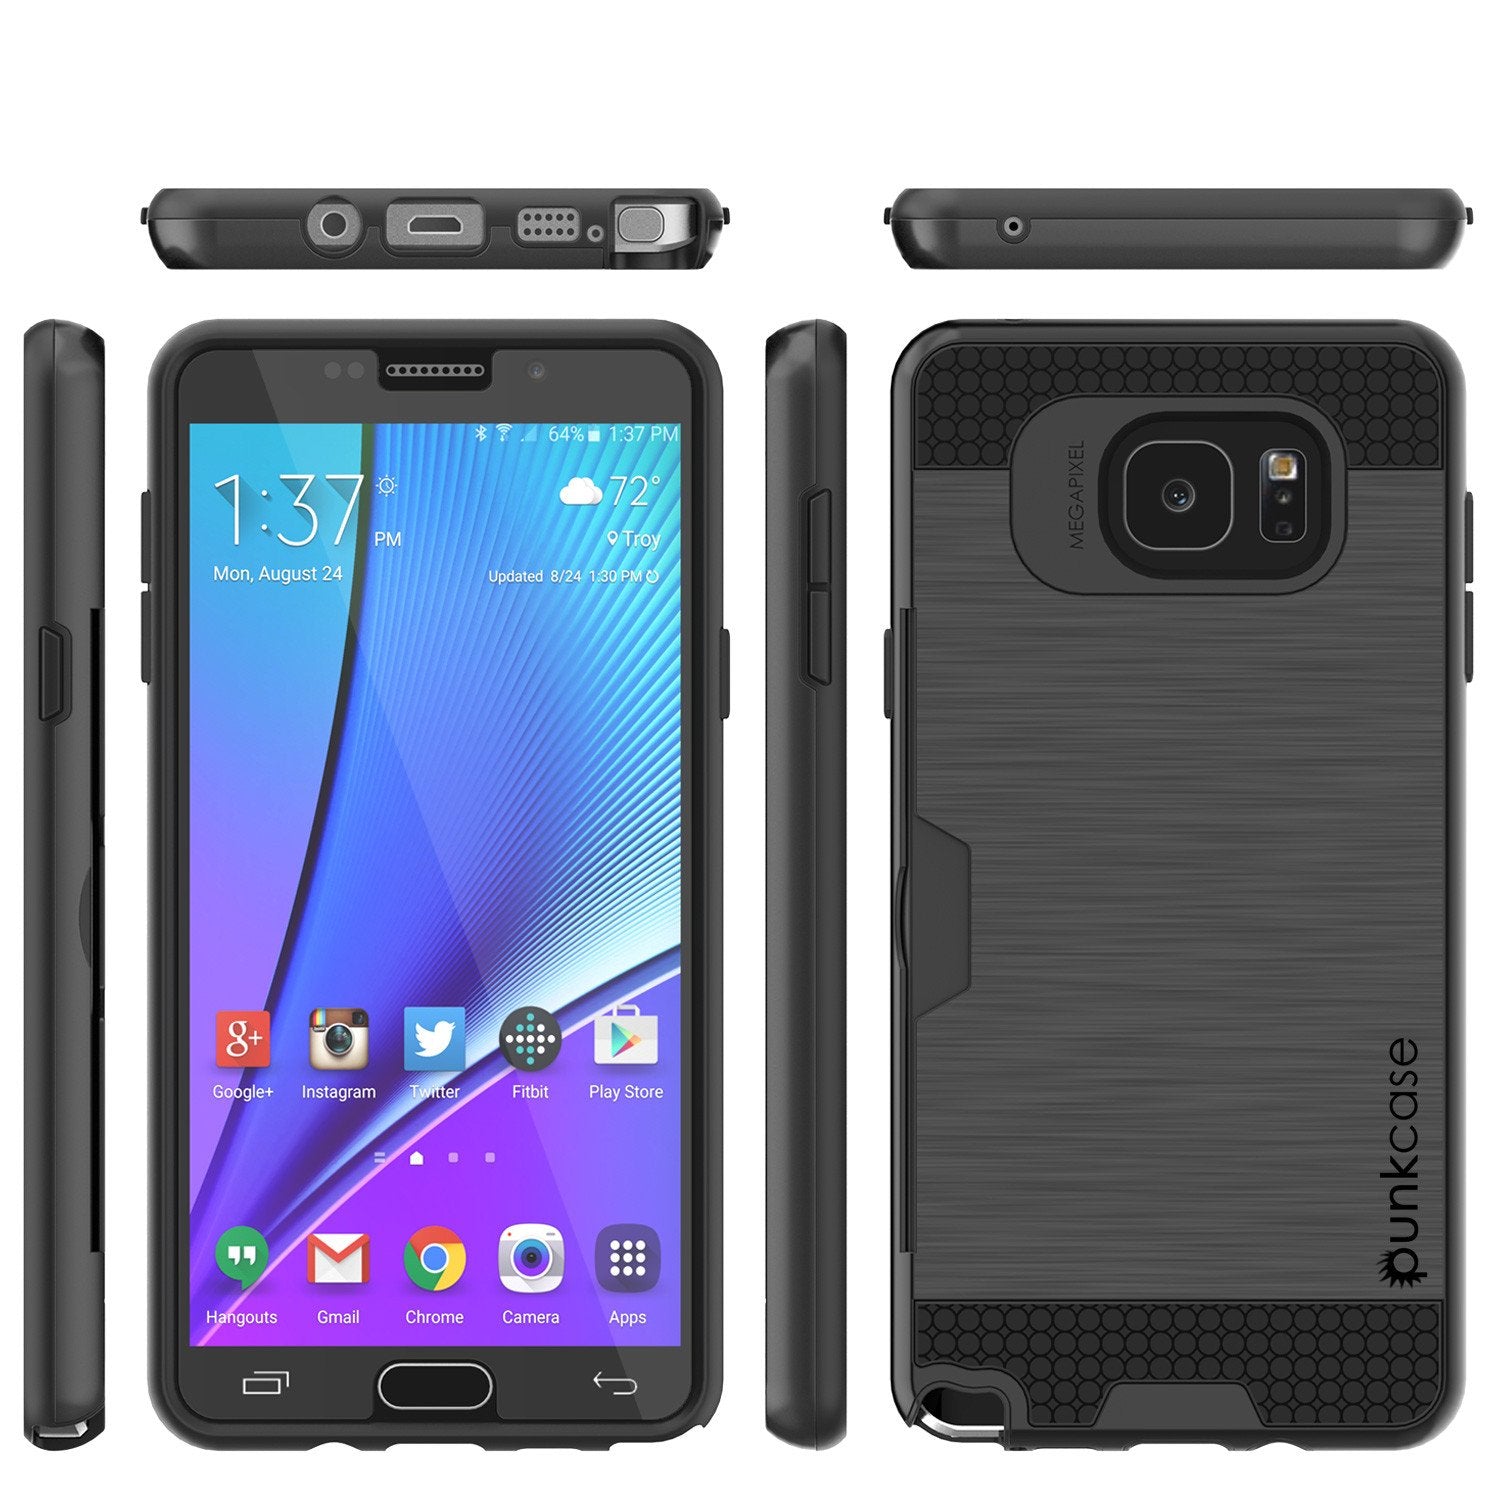 Galaxy Note 5 Case PunkCase SLOT Black Series Slim Armor Soft Cover Case w/ Tempered Glass